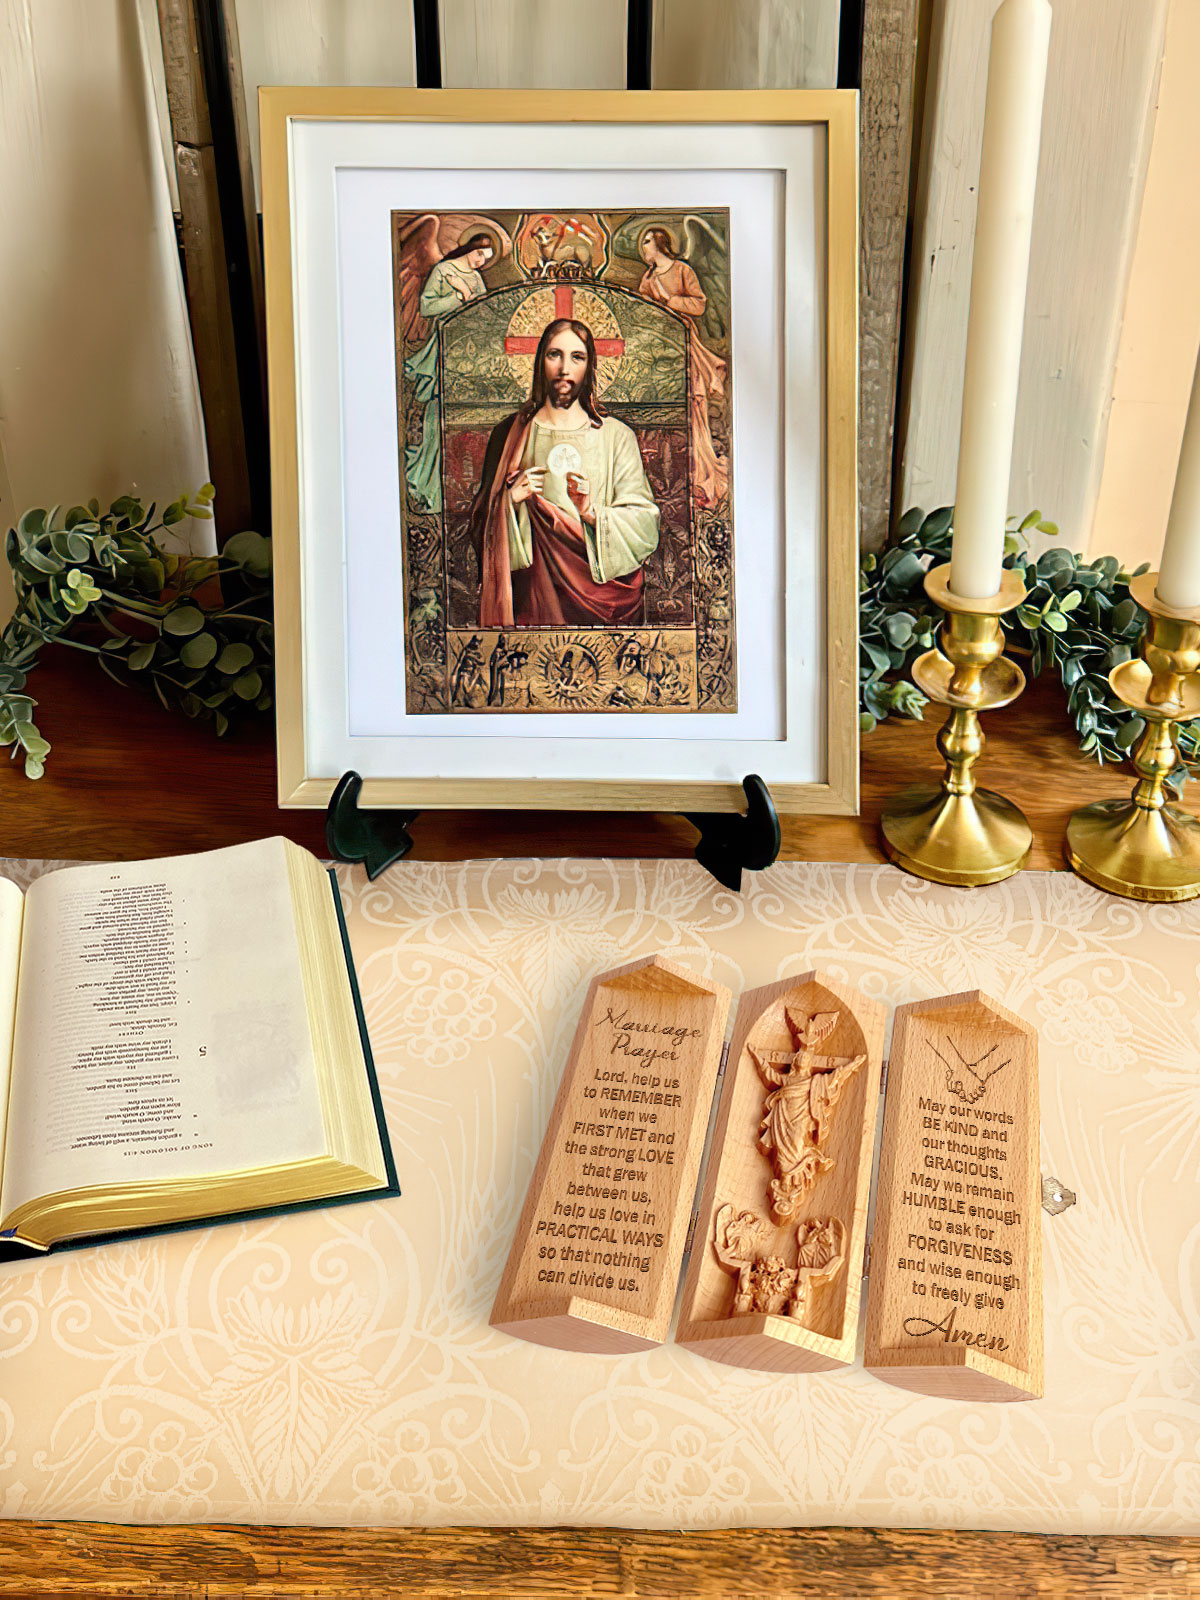 The Marriage Prayer - Openable Wooden Cylinder Sculpture of Jesus Christ